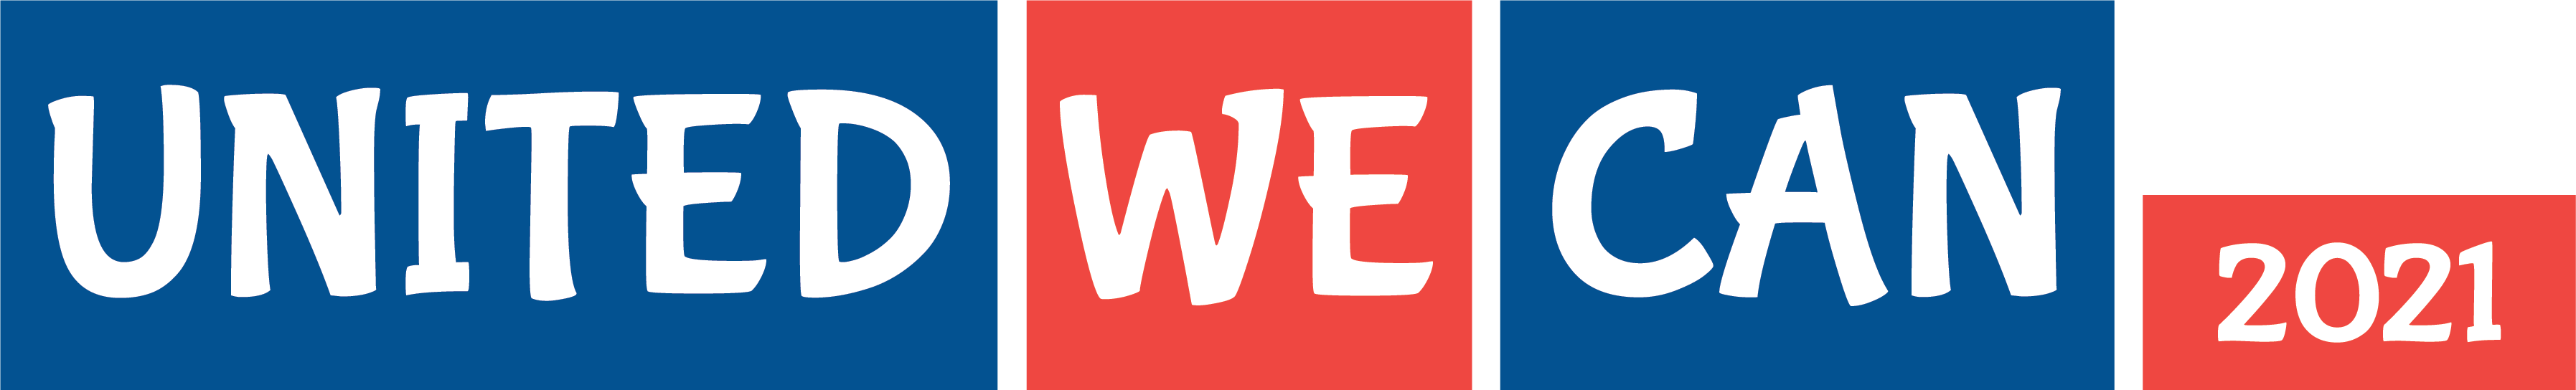 United We Can logo 2021.png